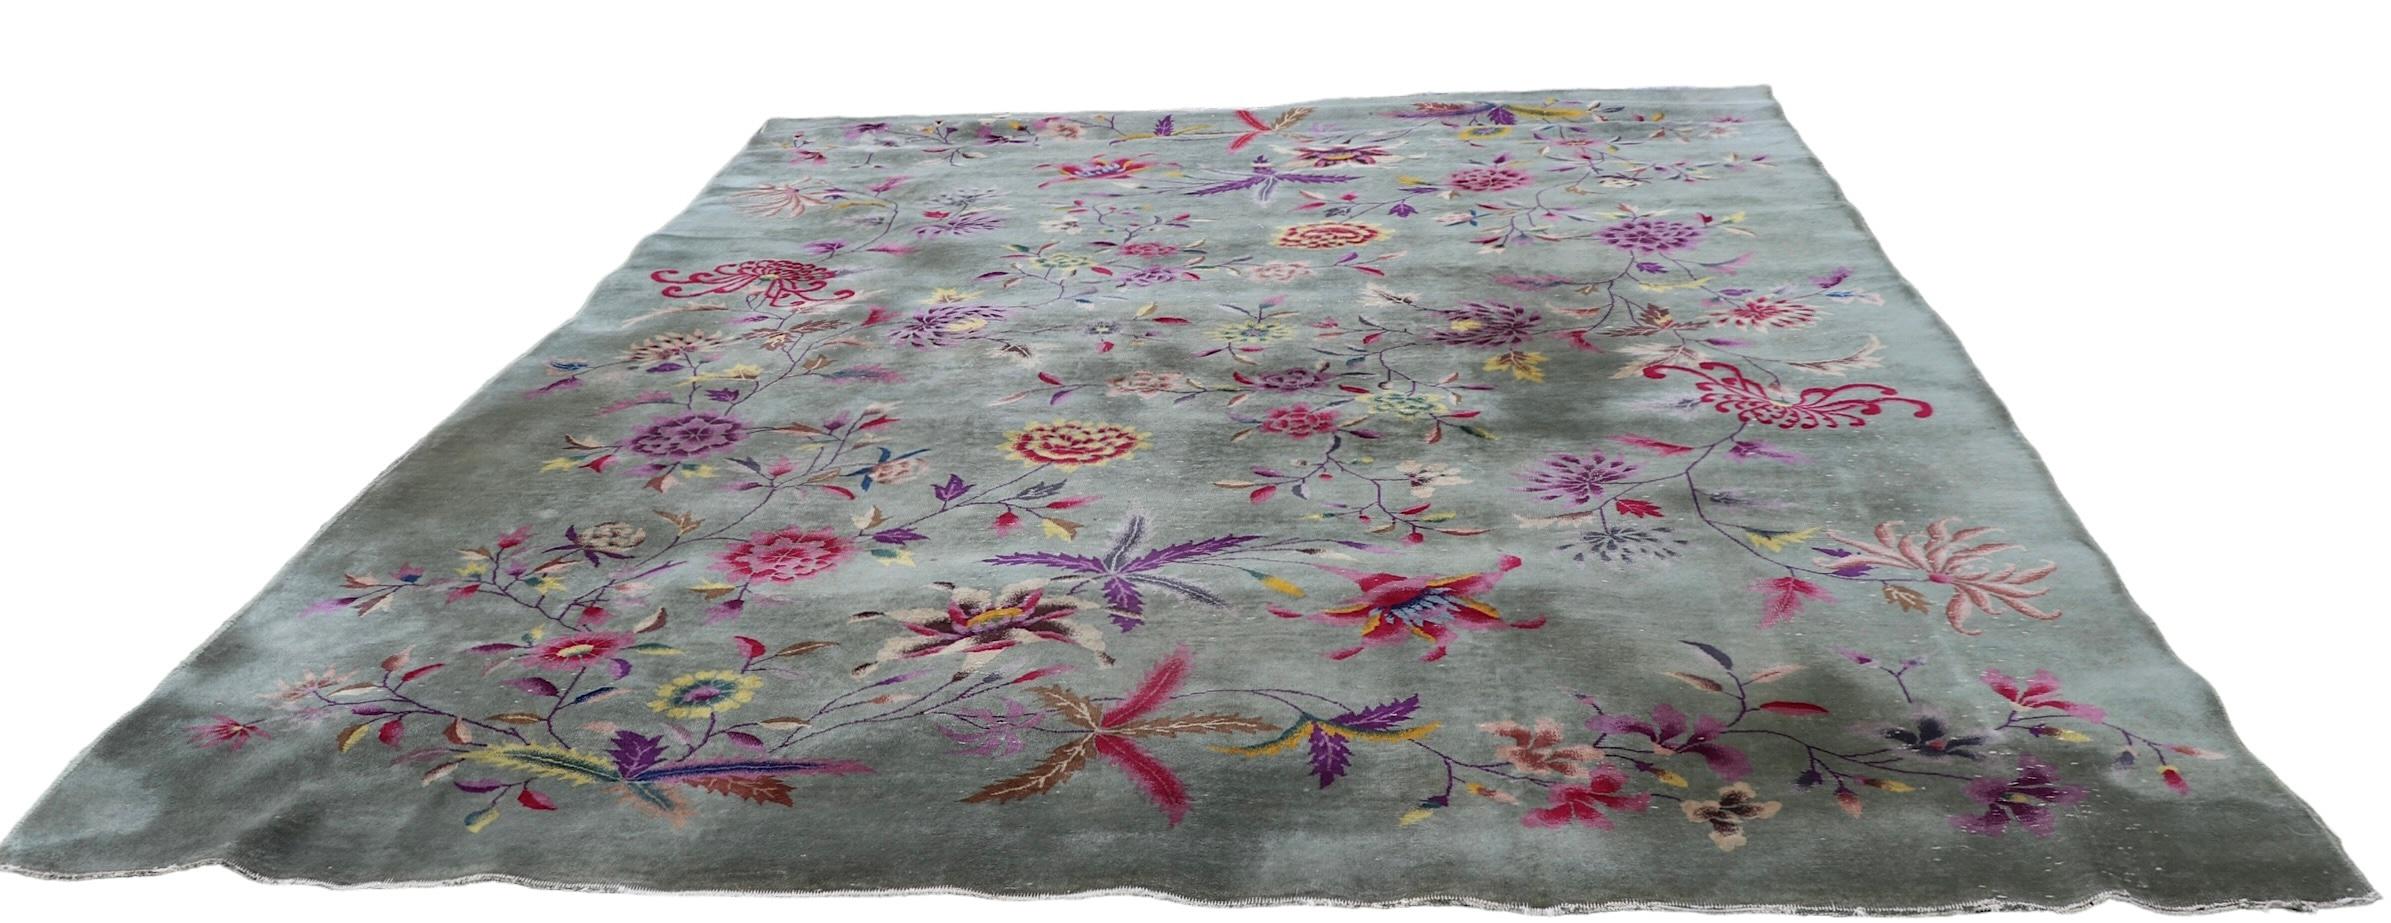 Art Deco Chinese Rug with Floral Motif c. 1920/1930's For Sale 3